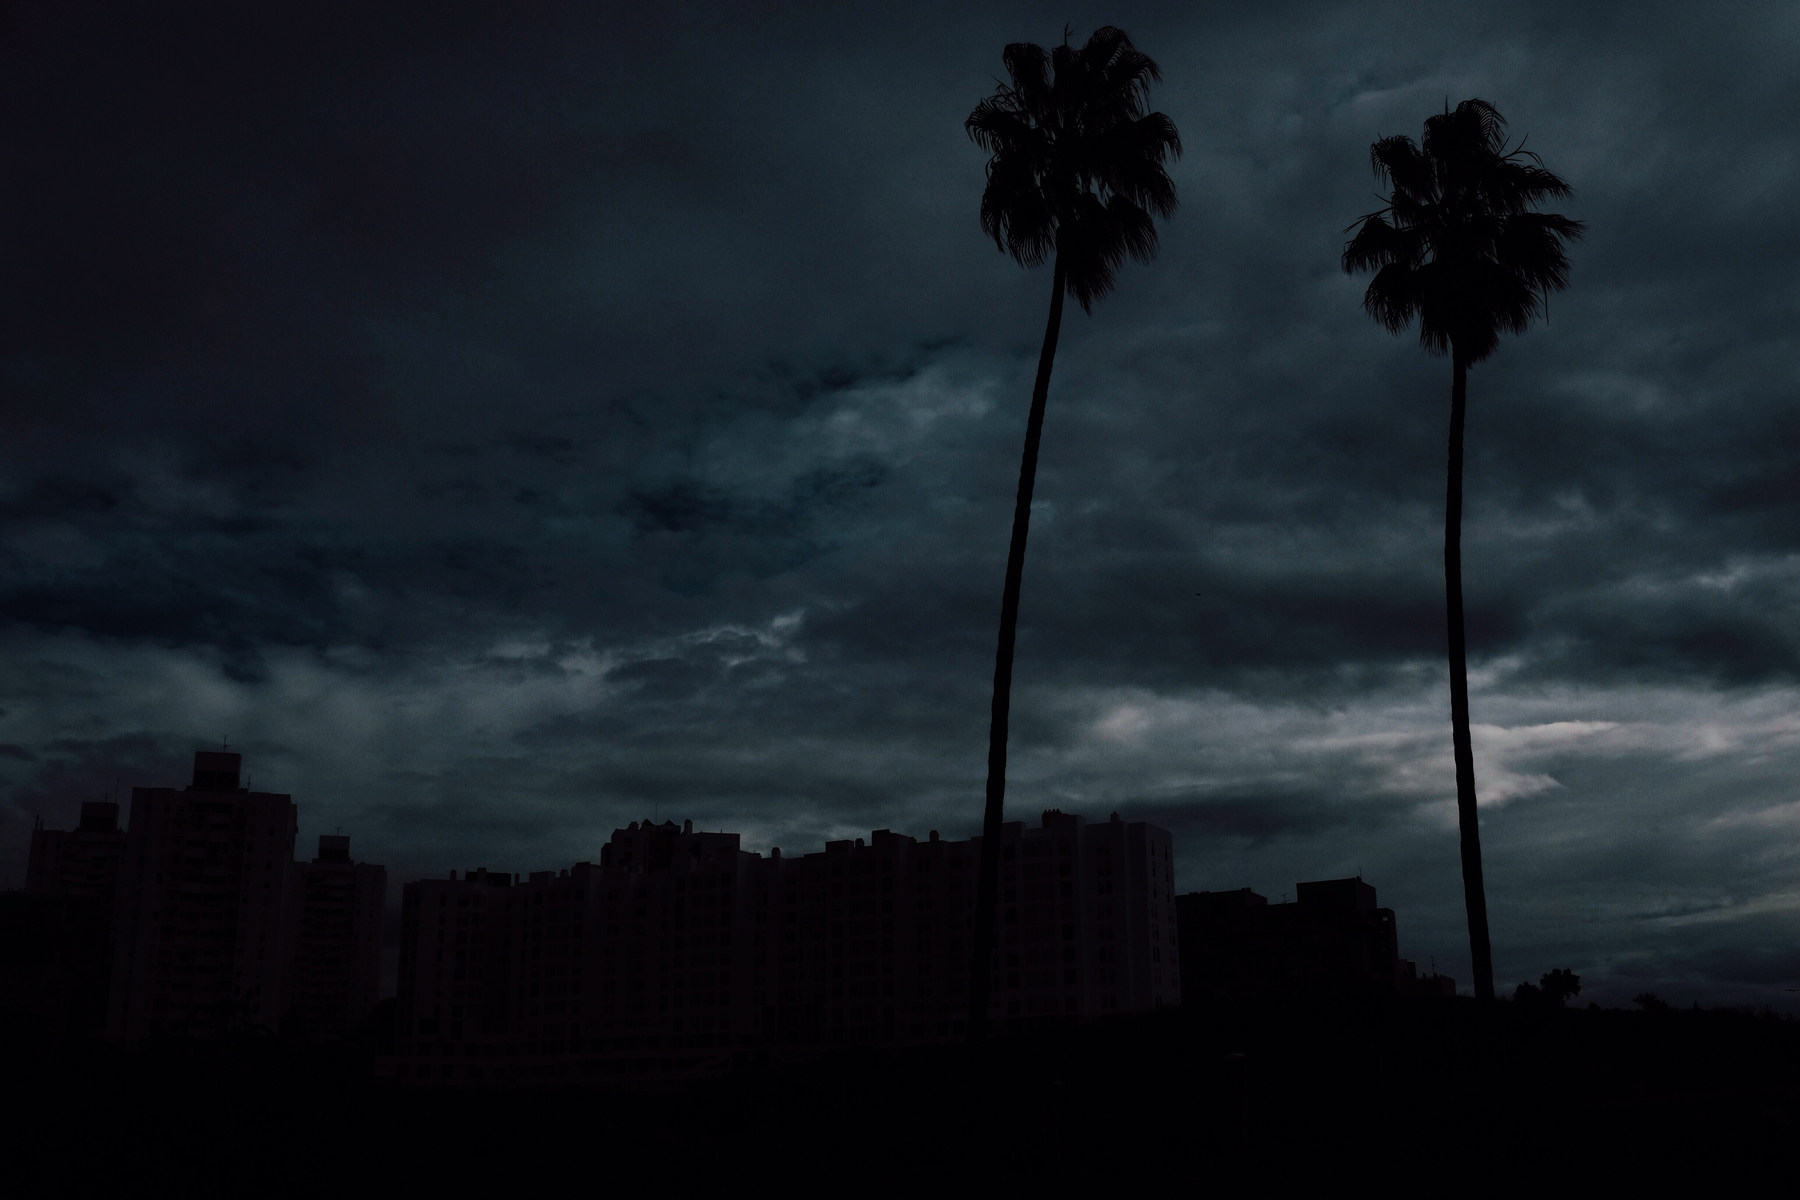 A silhouette of palm trees against a dark, cloudy sky with the outline of buildings in the background.